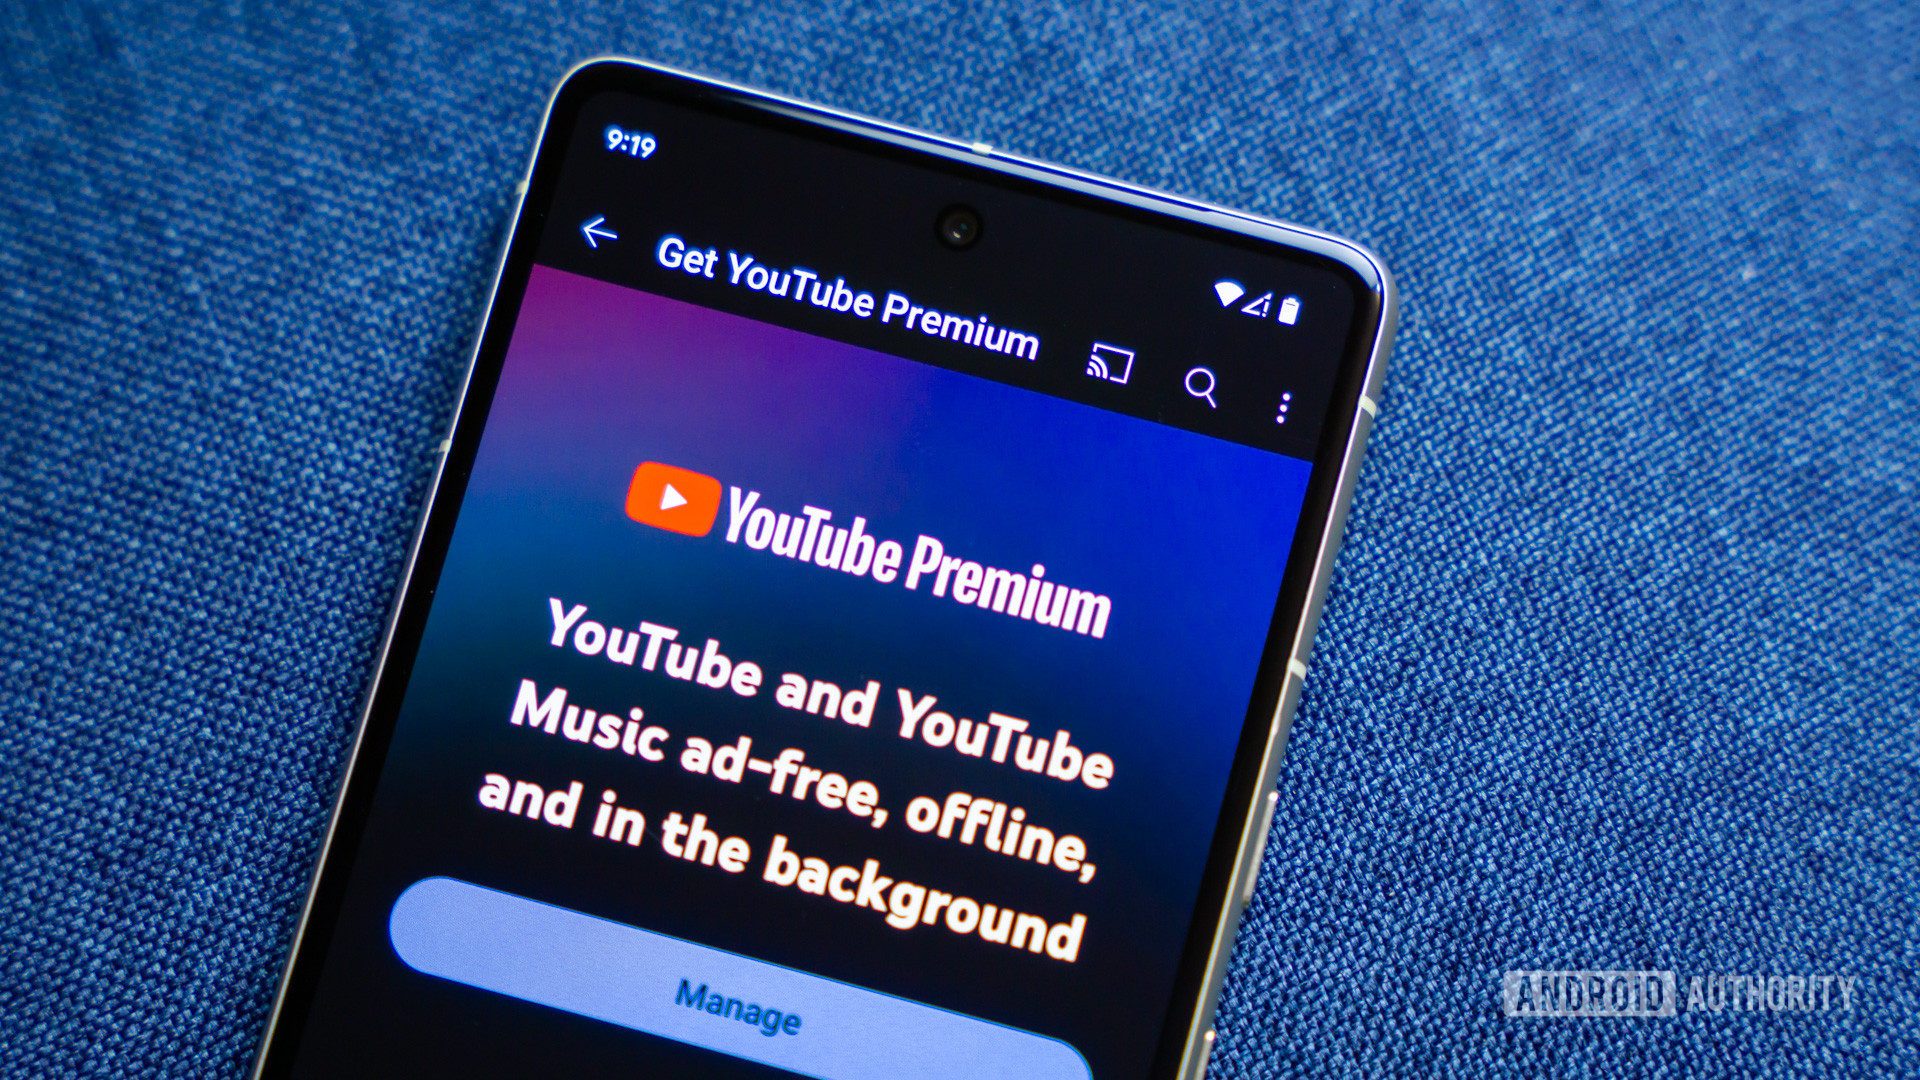 You told us: You’d skip YouTube Premium in favor of paying for an ad-blocker